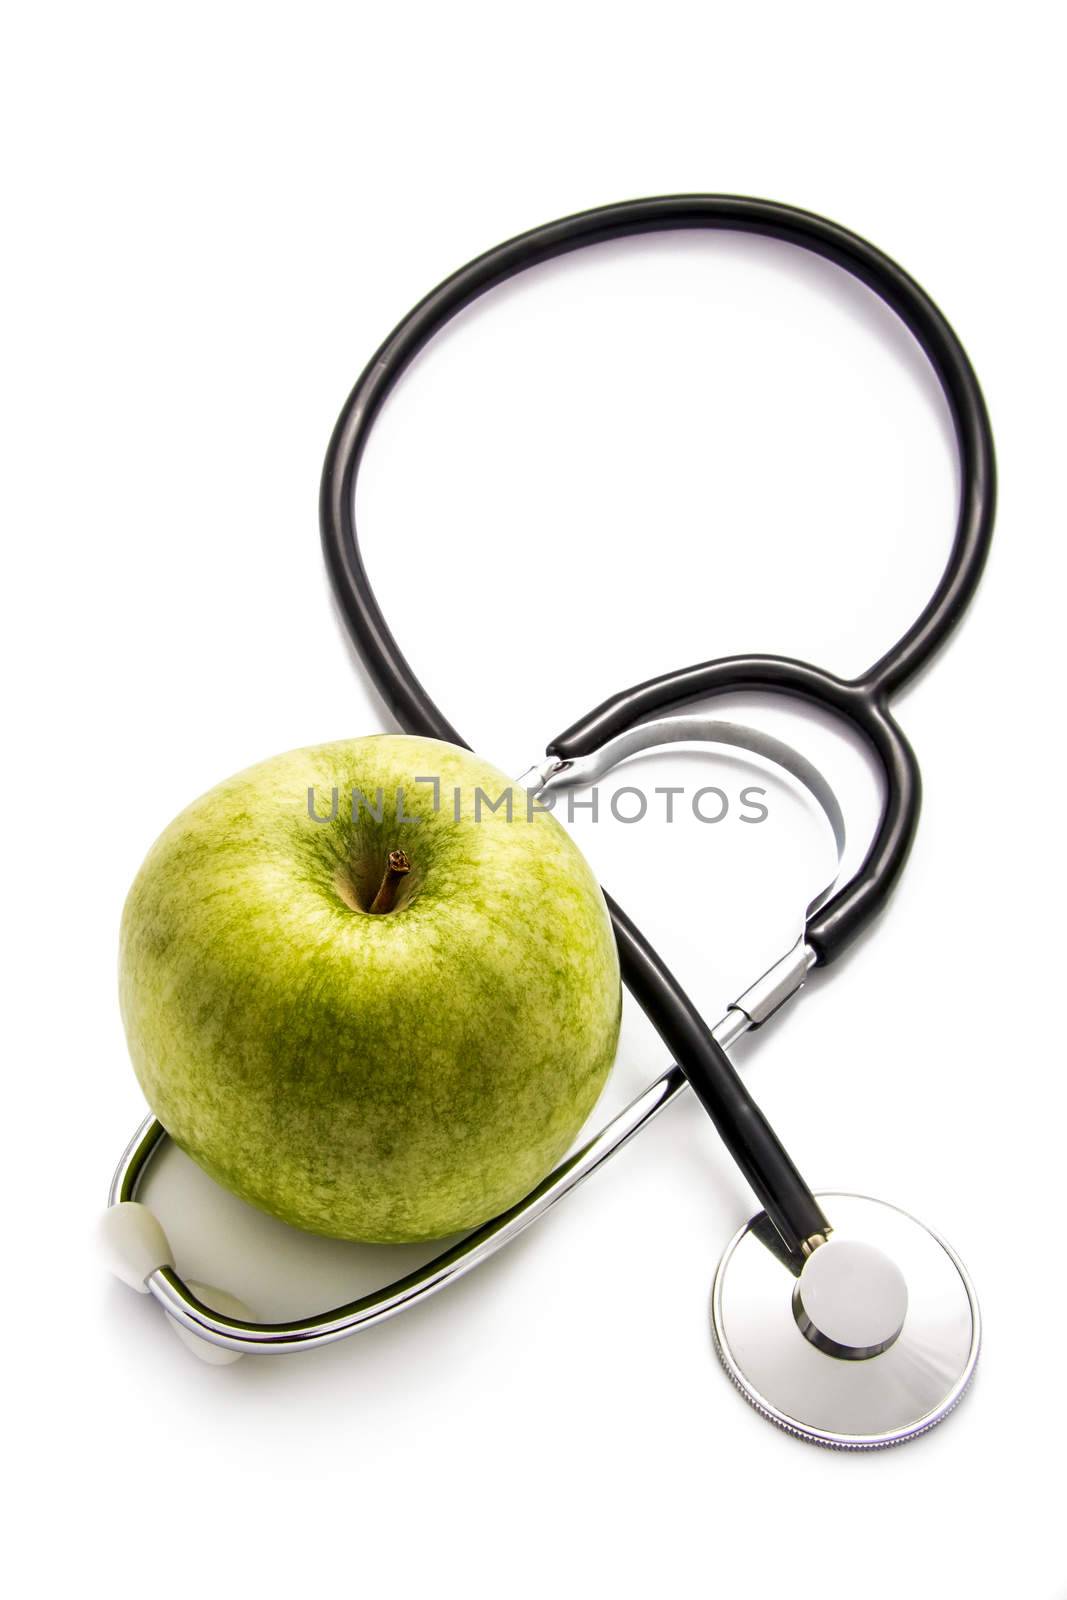 Apple and stethoscope by dynamicfoto